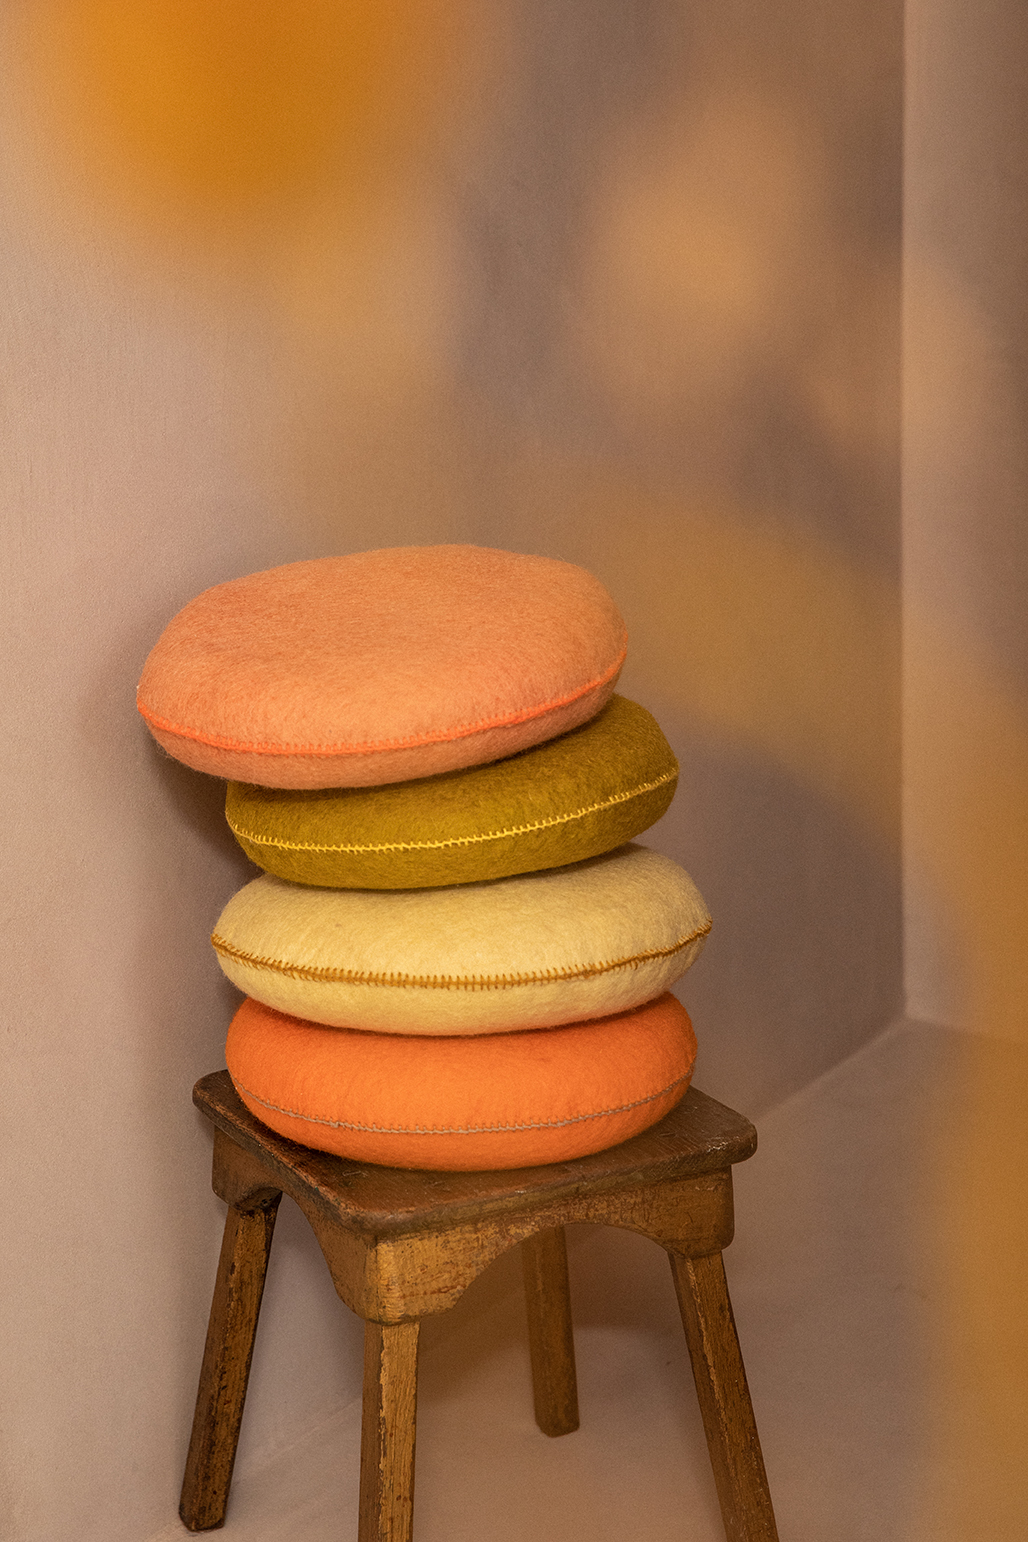 colorful pile of 4 small round cushions in pink, green, yellow and orange wool felt